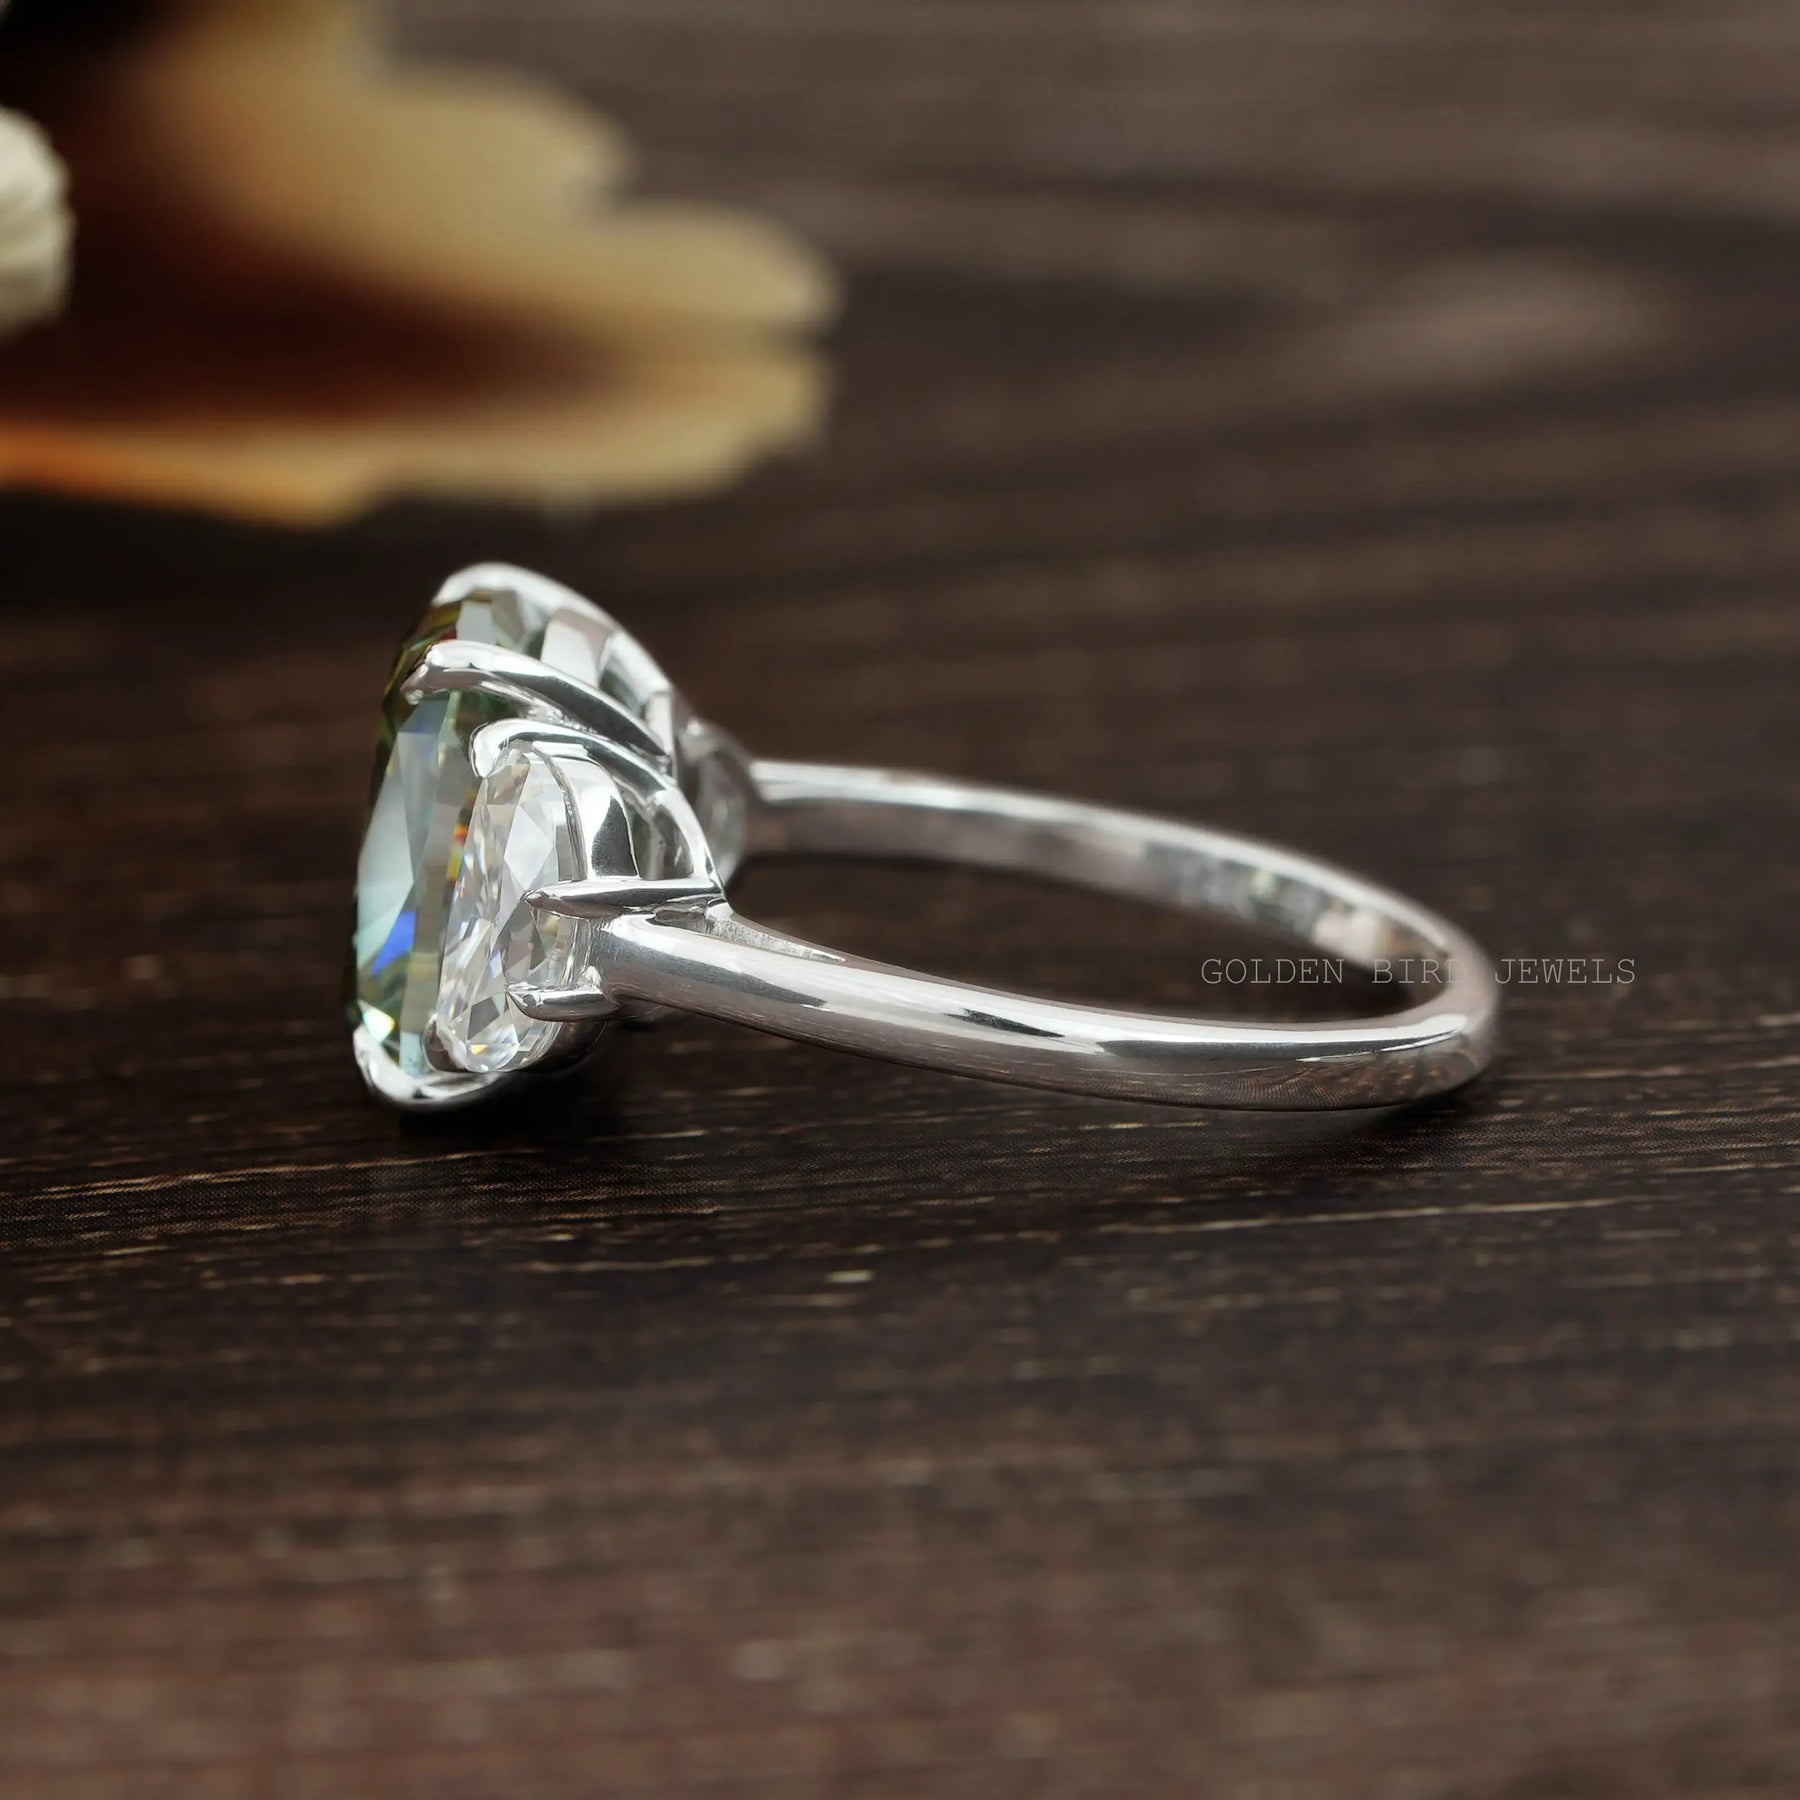 [Green Cushion Cut Moissanite 3 Stone Ring Made With 18K Solid  White Gold]-[Golden Bird Jewels]